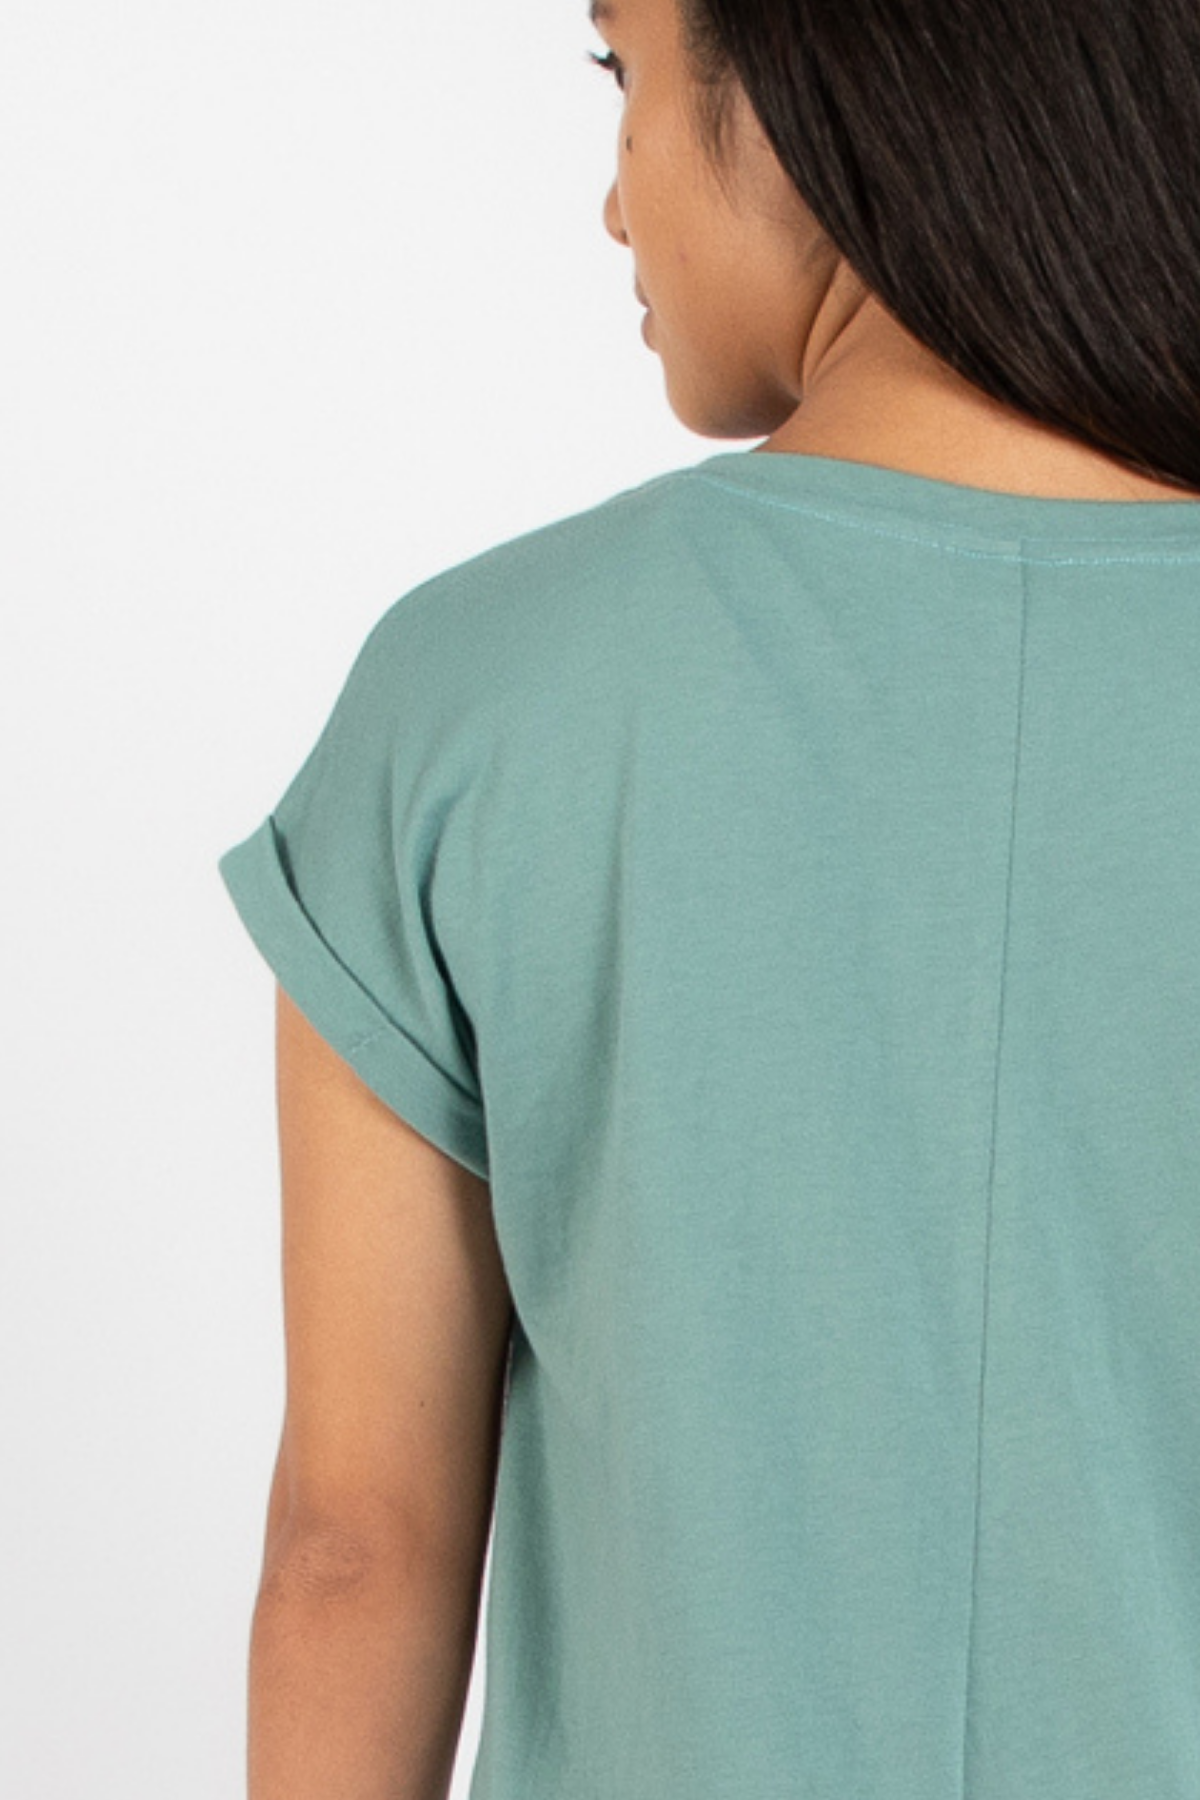 Dorsu Relaxed Crew Tee in Seafoam, available on ZERRIN